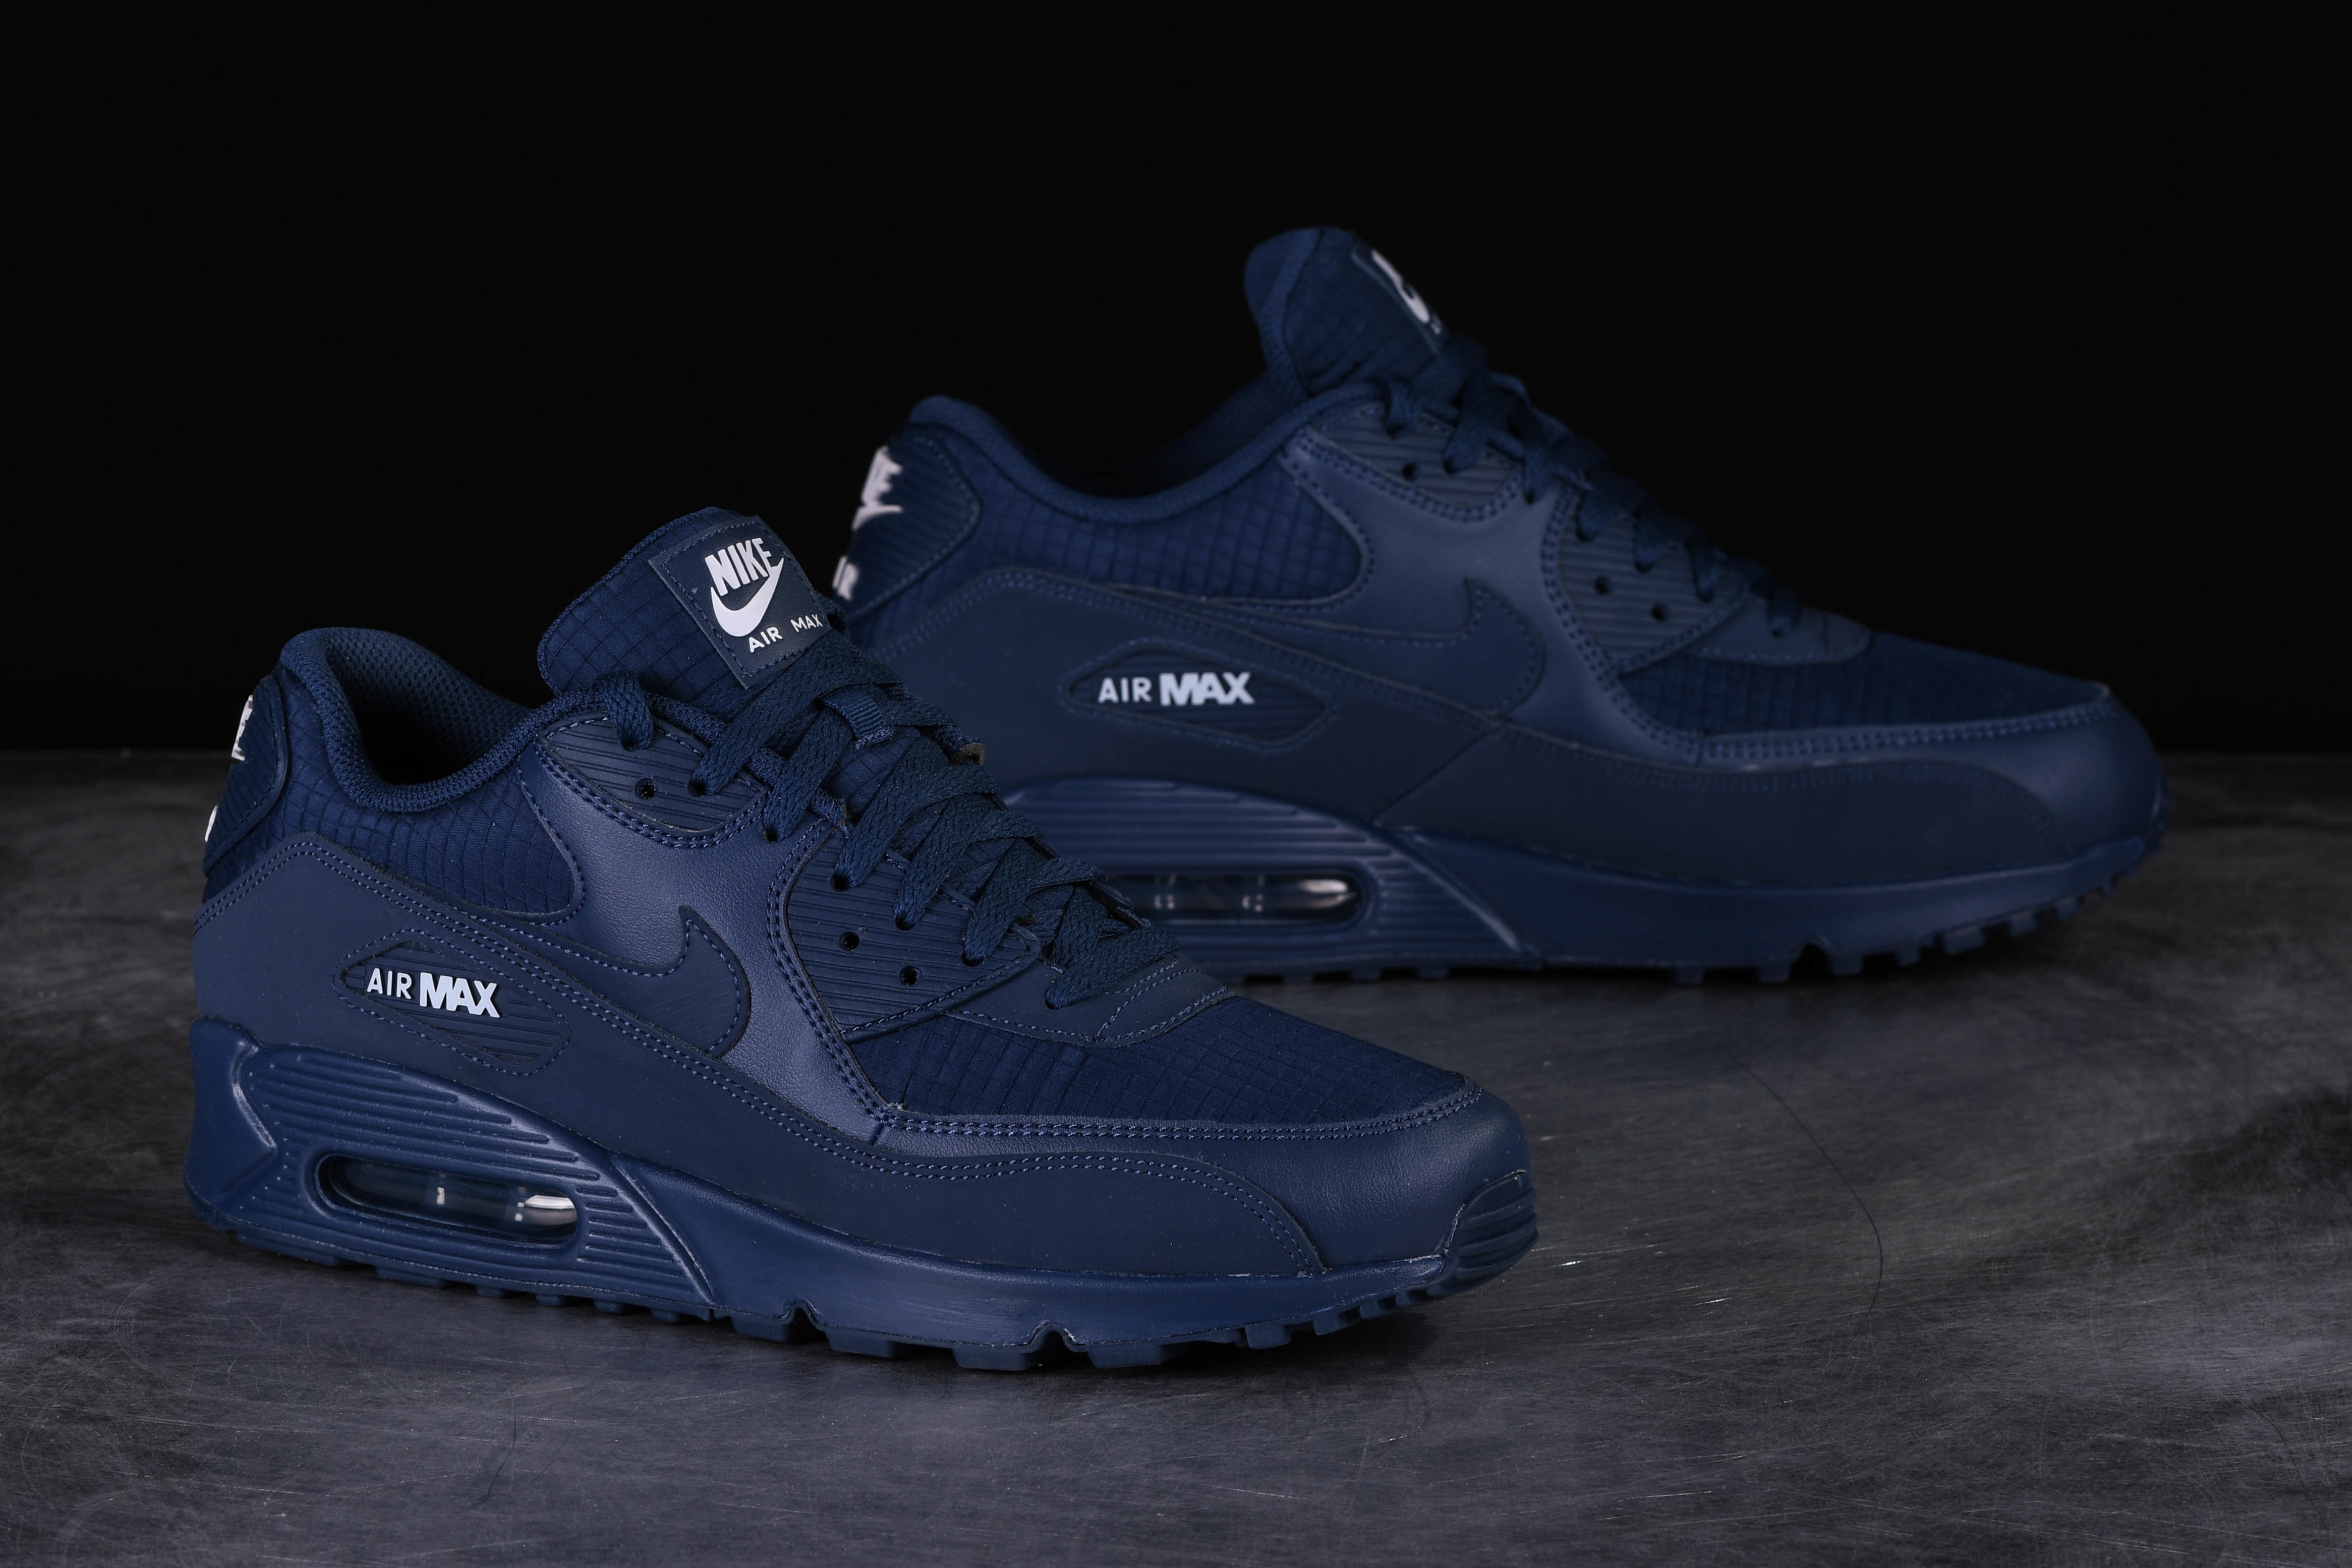 embrace Shadow naked NIKE AIR MAX 90 ESSENTIAL MIDNIGHT NAVY price €115.00 | Basketzone.net